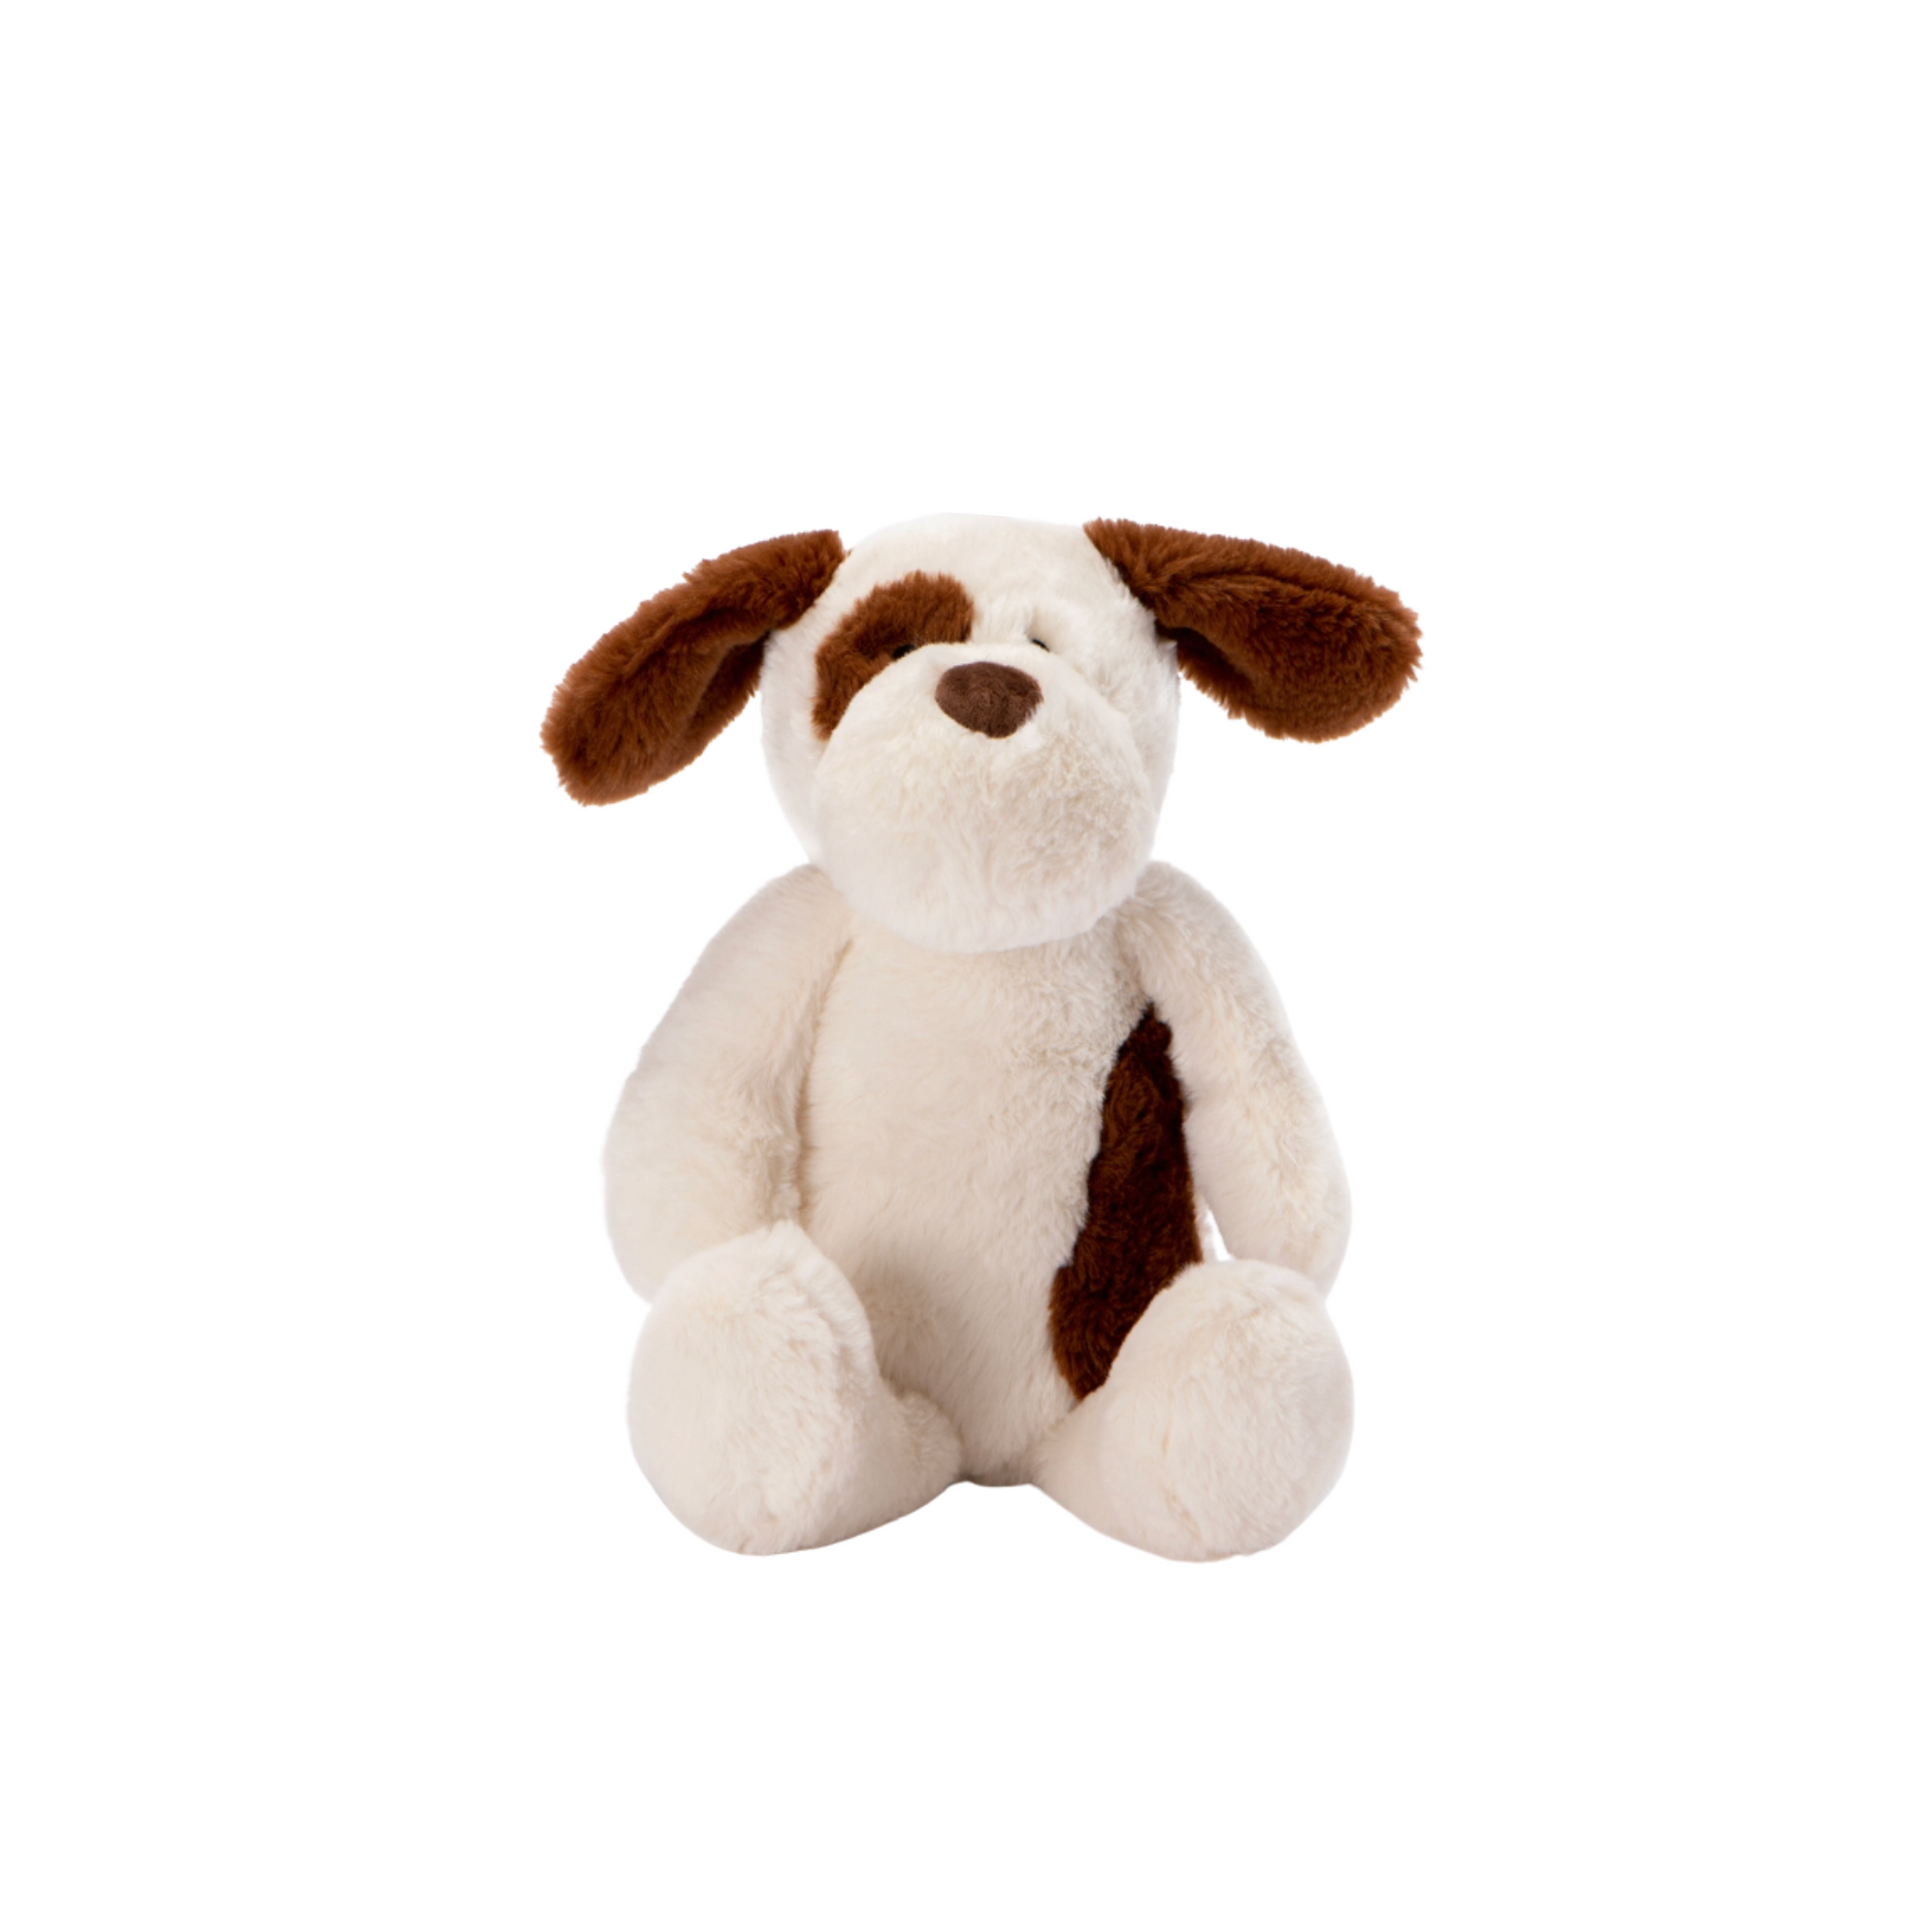 A very cute dog toy with floppy ears